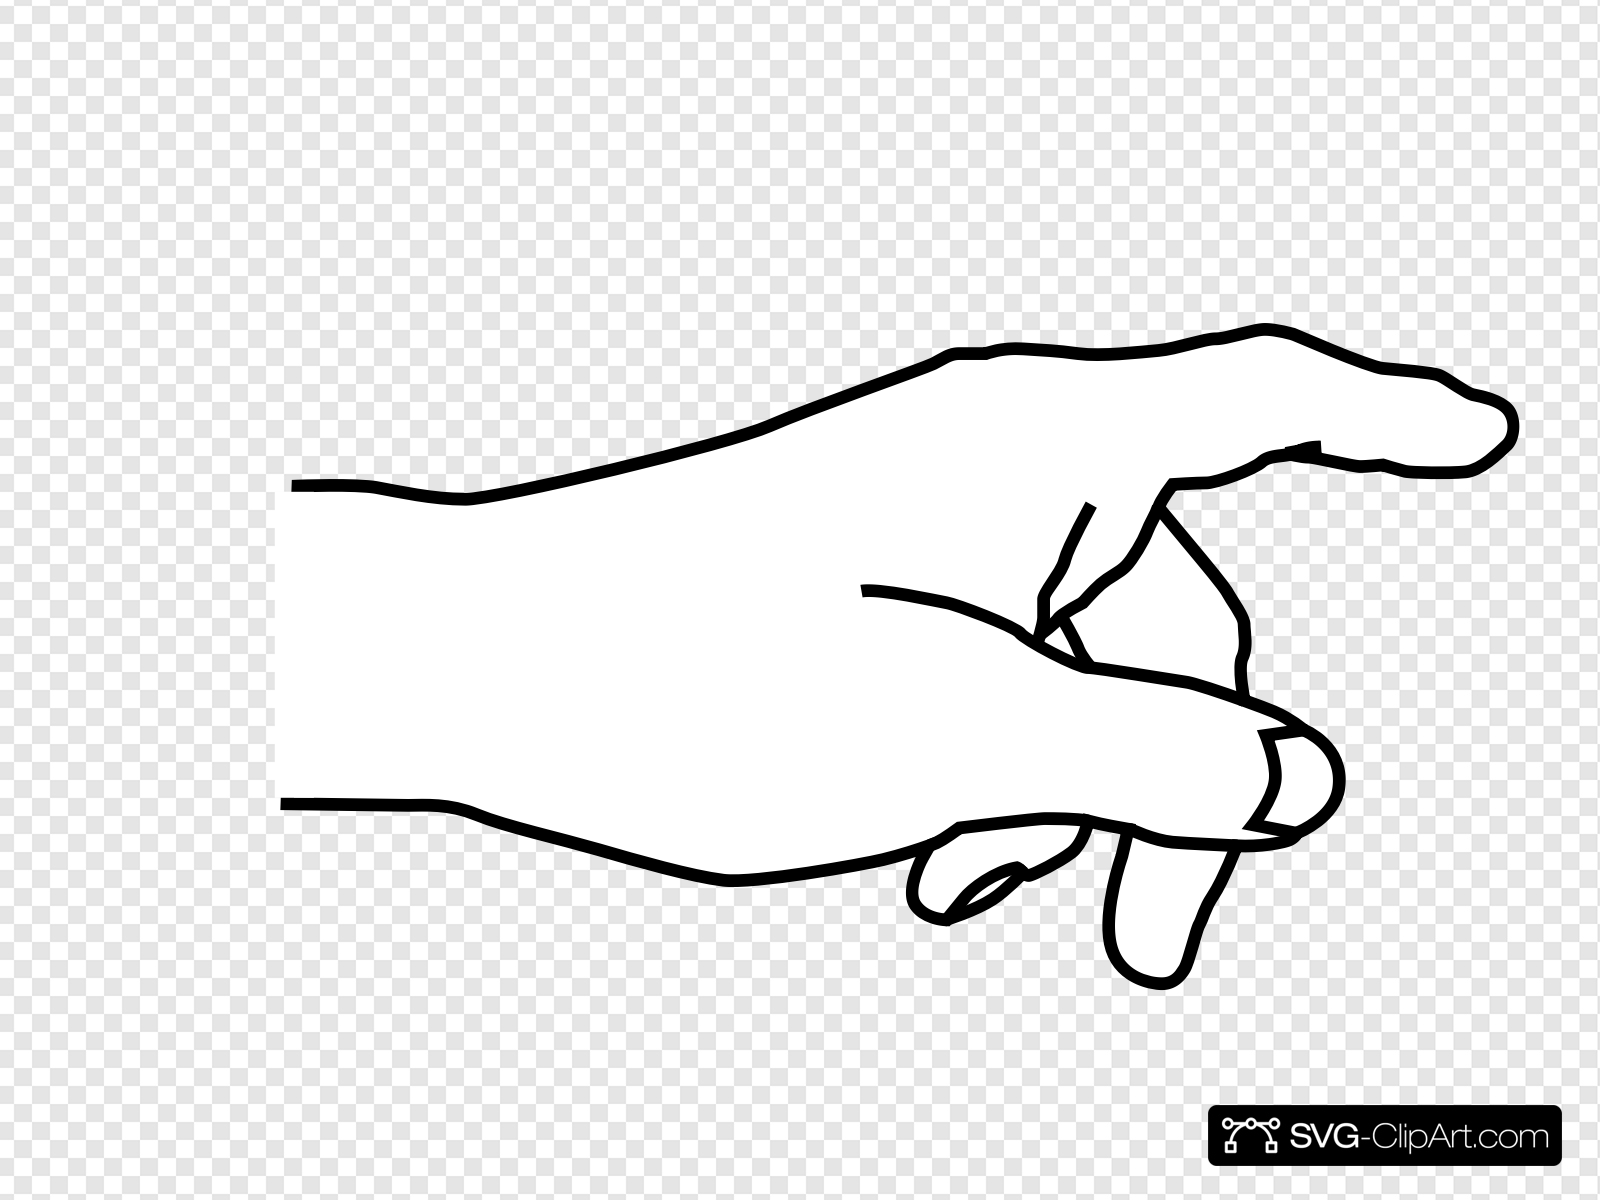 Hand Pointing Clip art, Icon and SVG